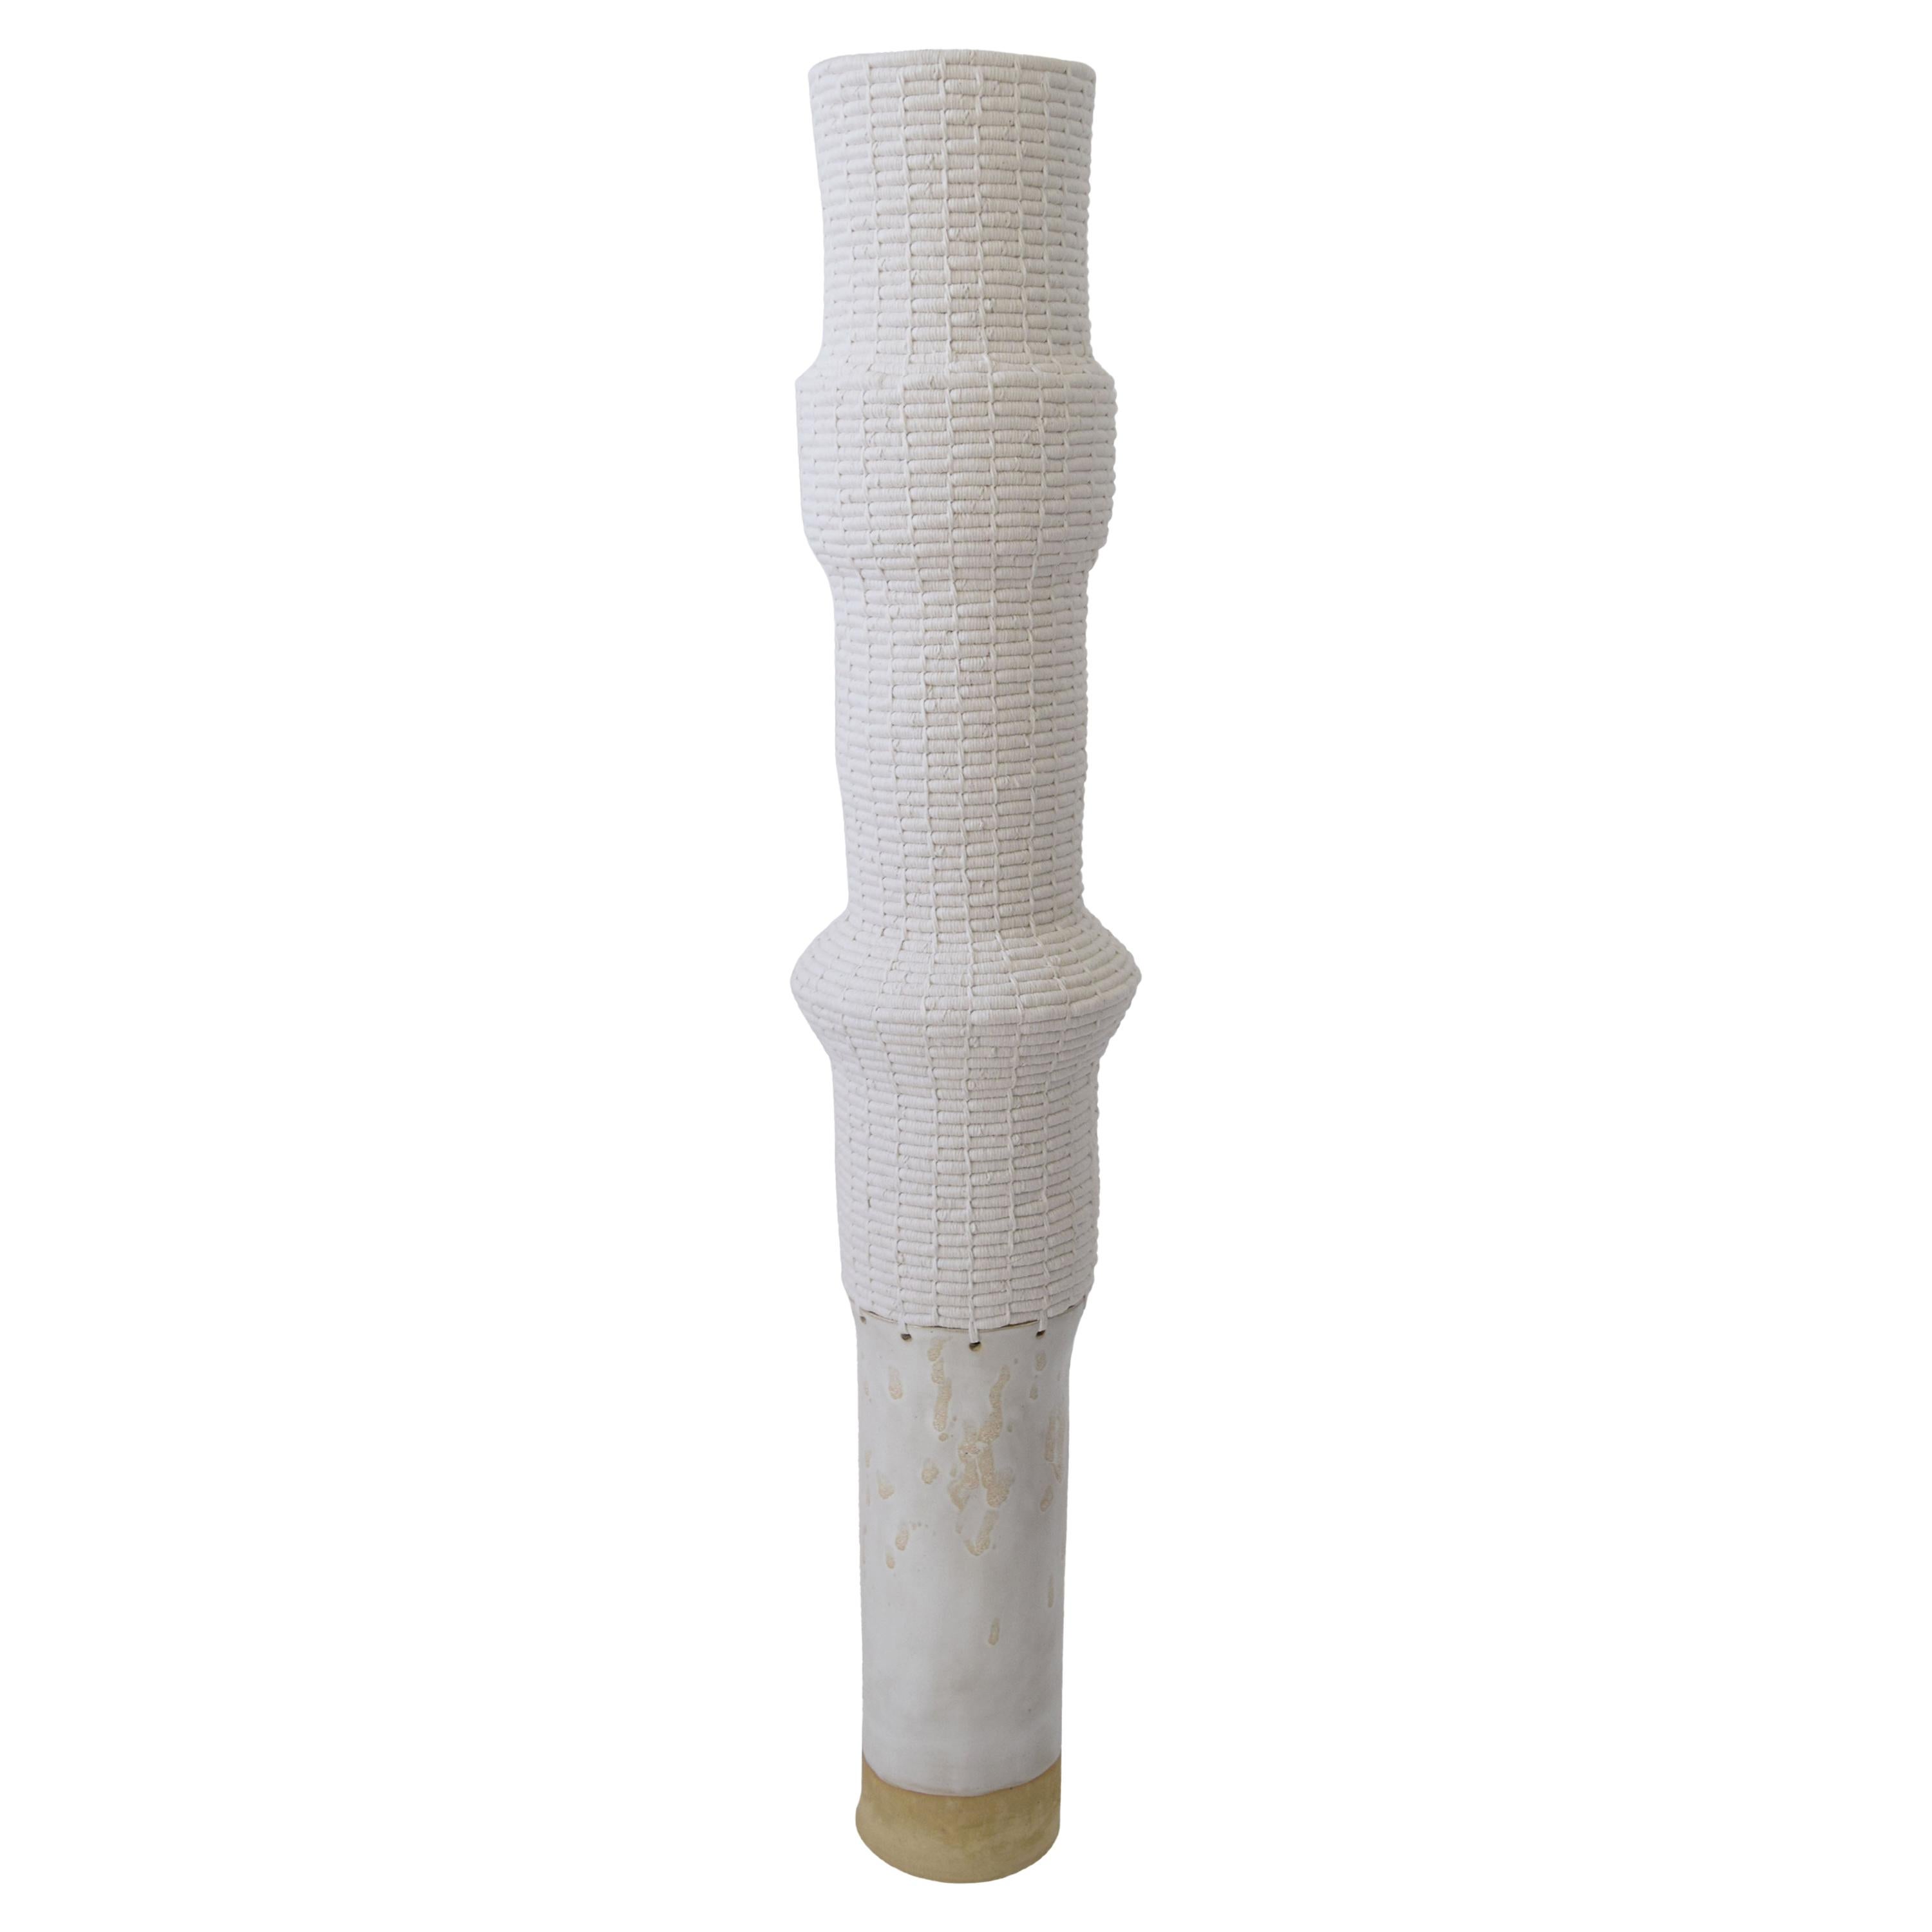 Tall (36") Ceramic and Woven Cotton Floor Vessel in White